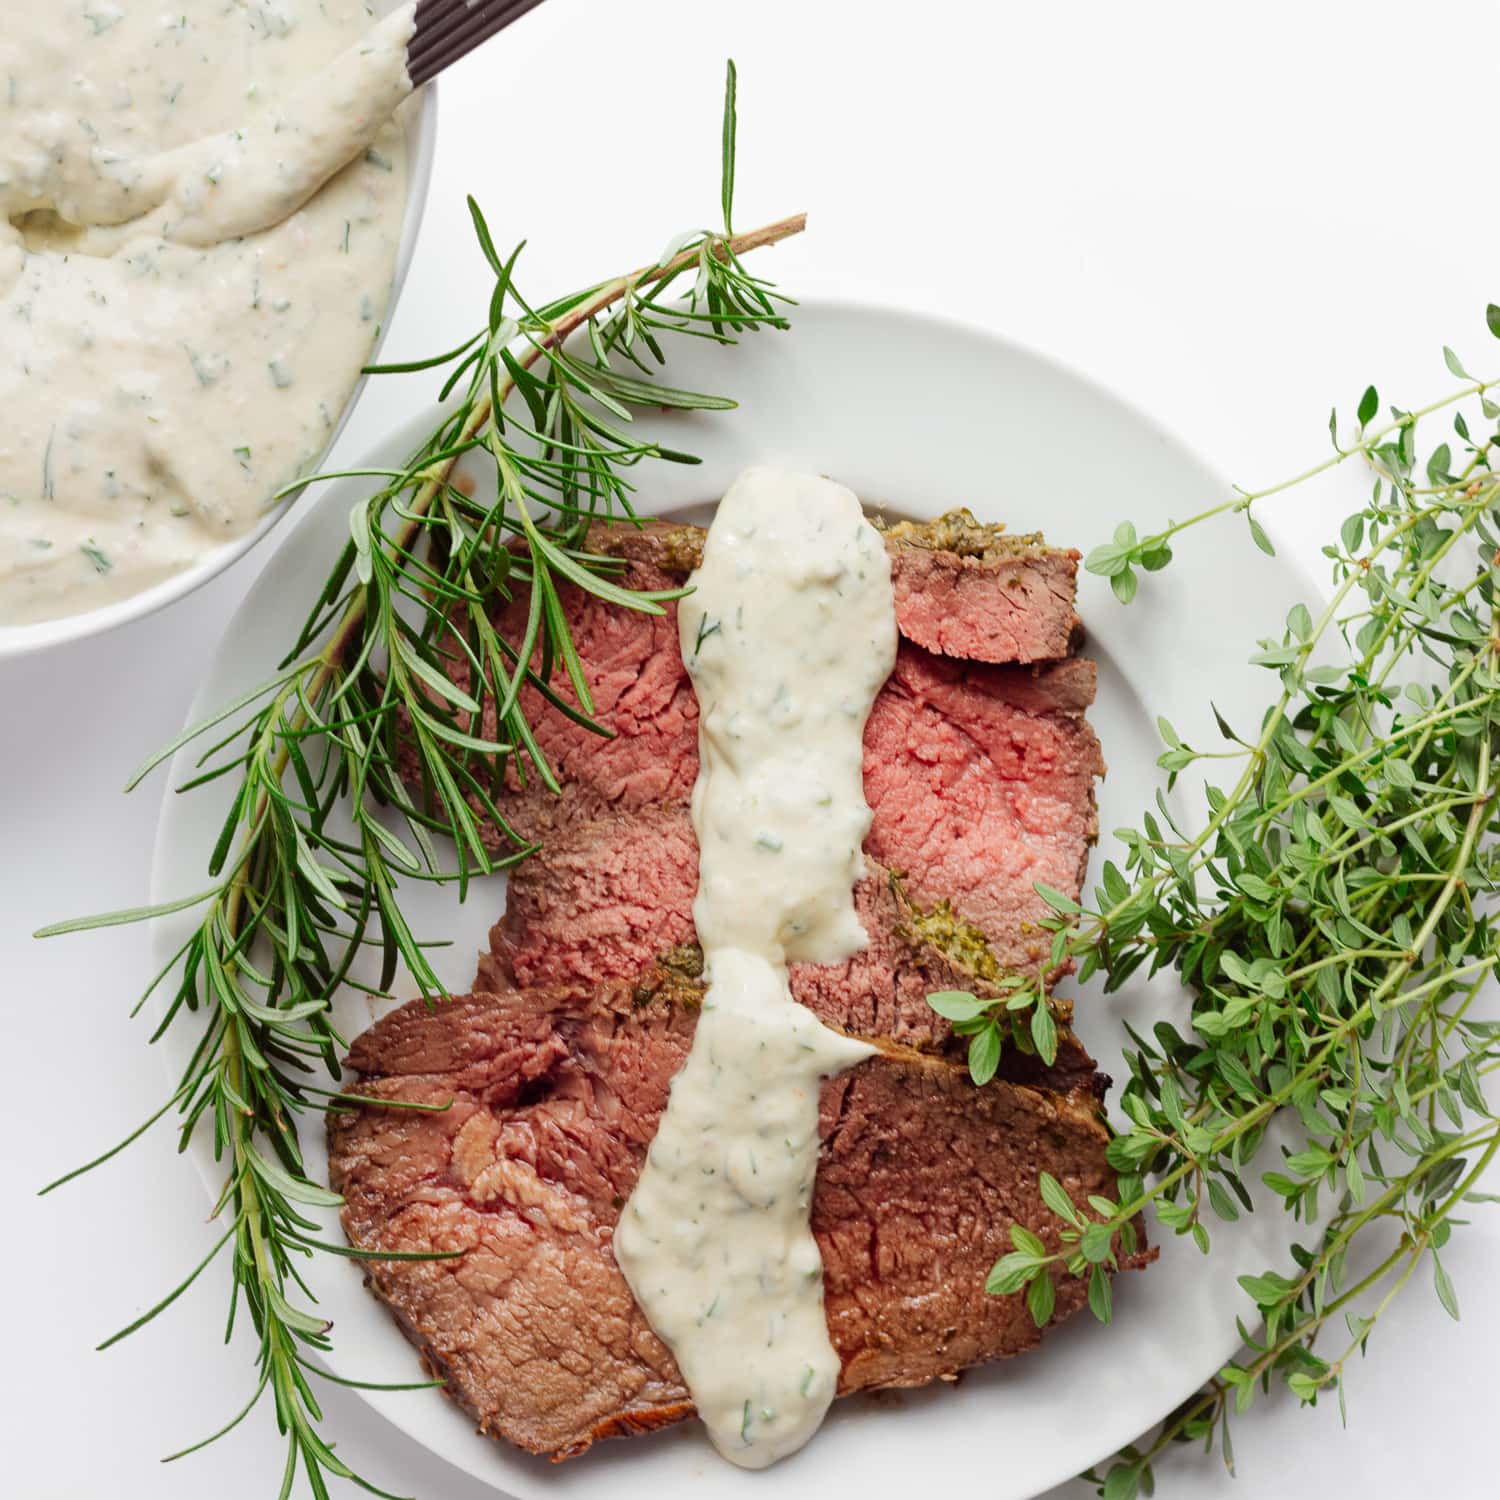 Roast beef slices on a plate with a drizzle of creamy herb sauce down the middle.